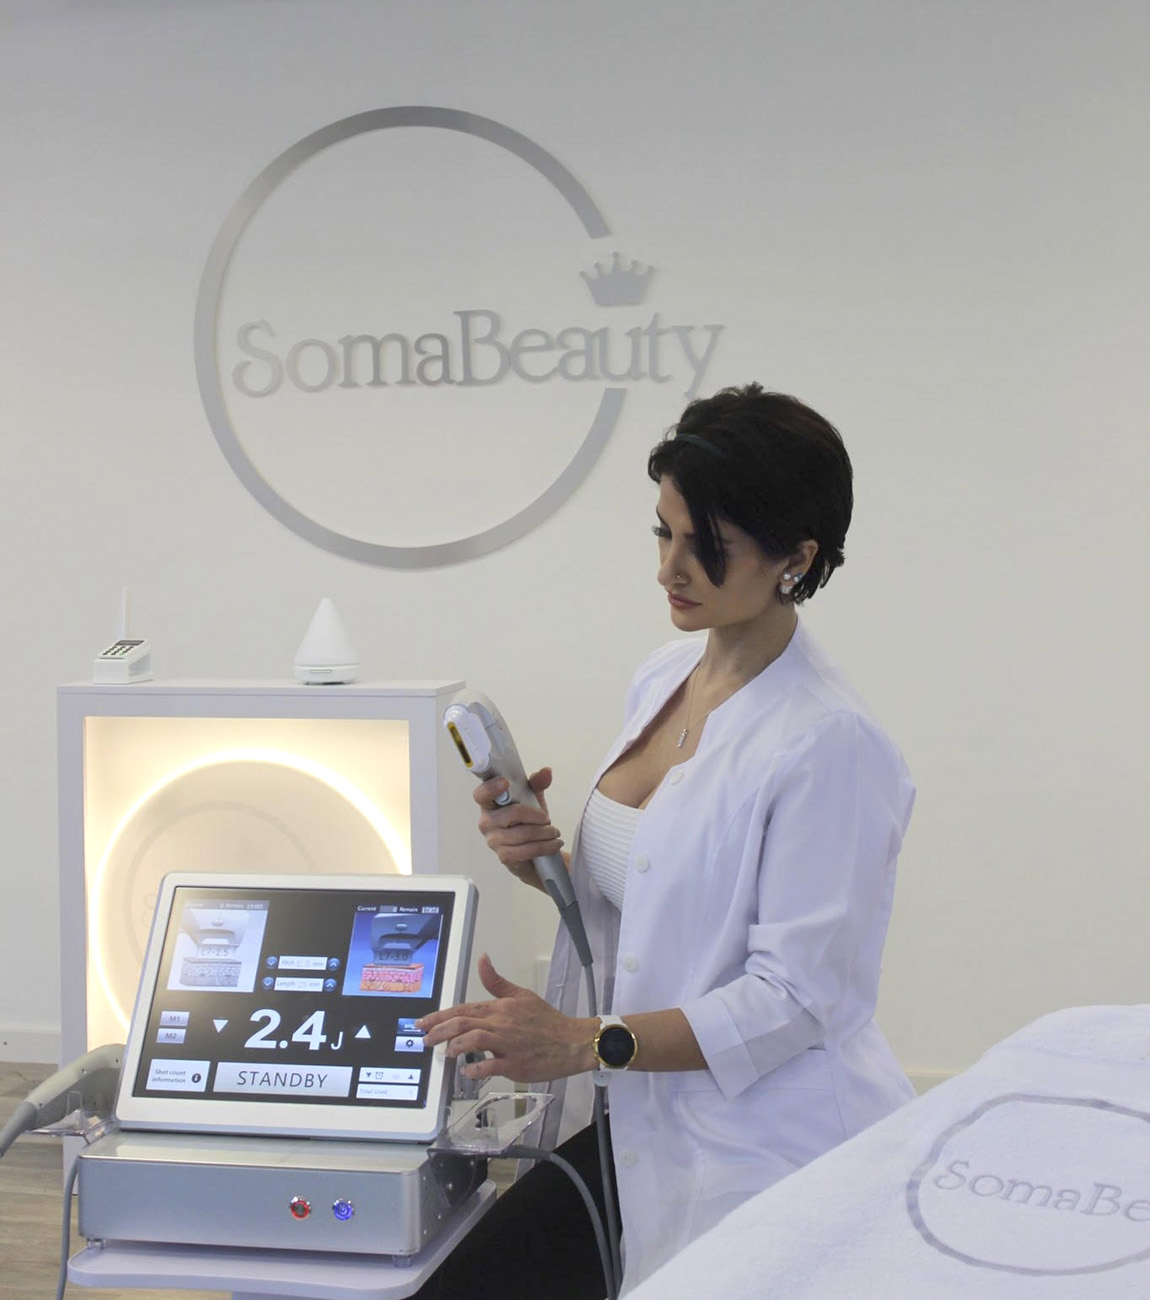 Soma Beauty: Modern professional beauty care in Finland’s oldest city